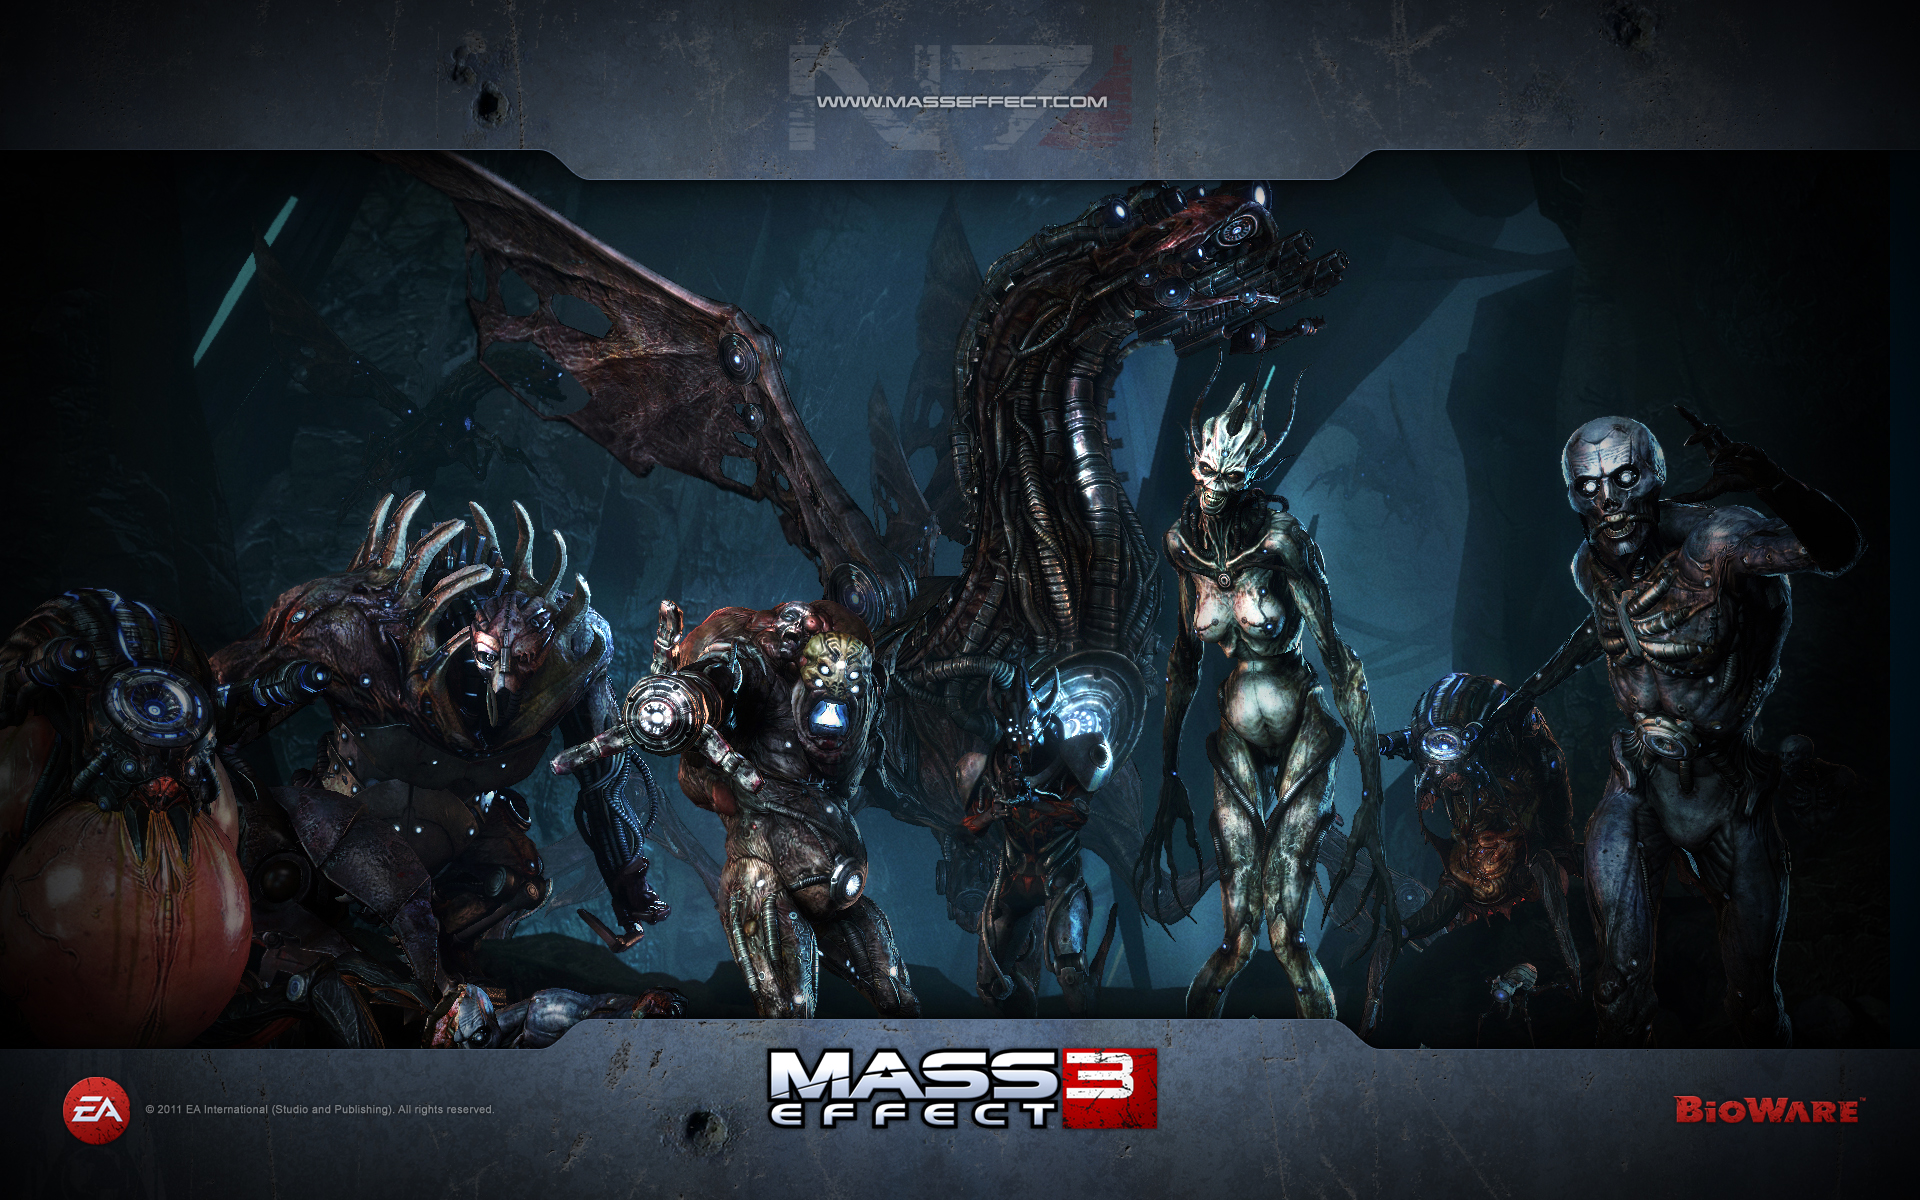 Of Mass Effect You Are Ing Wallpaper